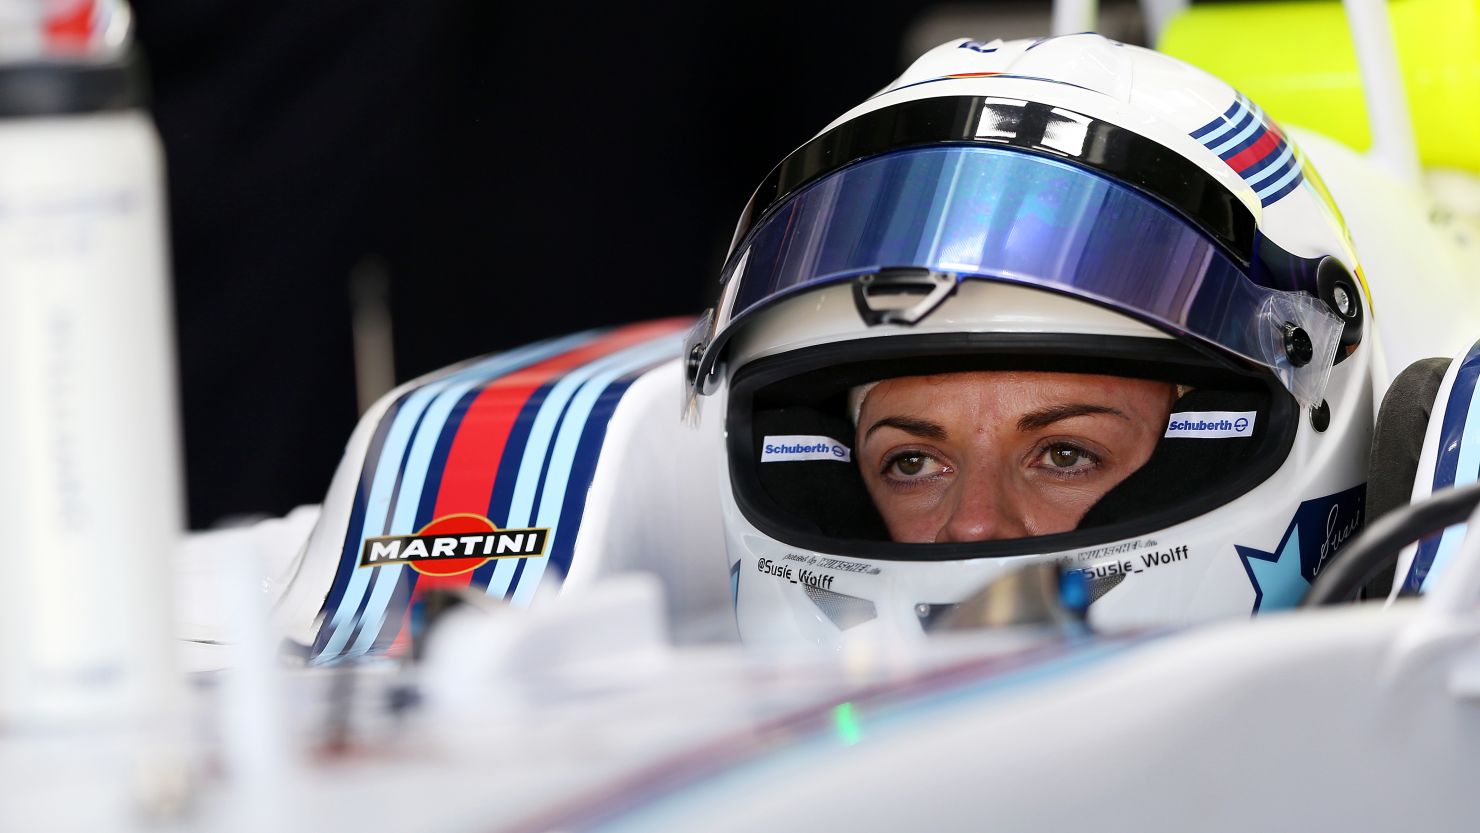 Susie Wolff completed 20 laps in Friday's first practice for the German Grand Prix at Hockenheim.